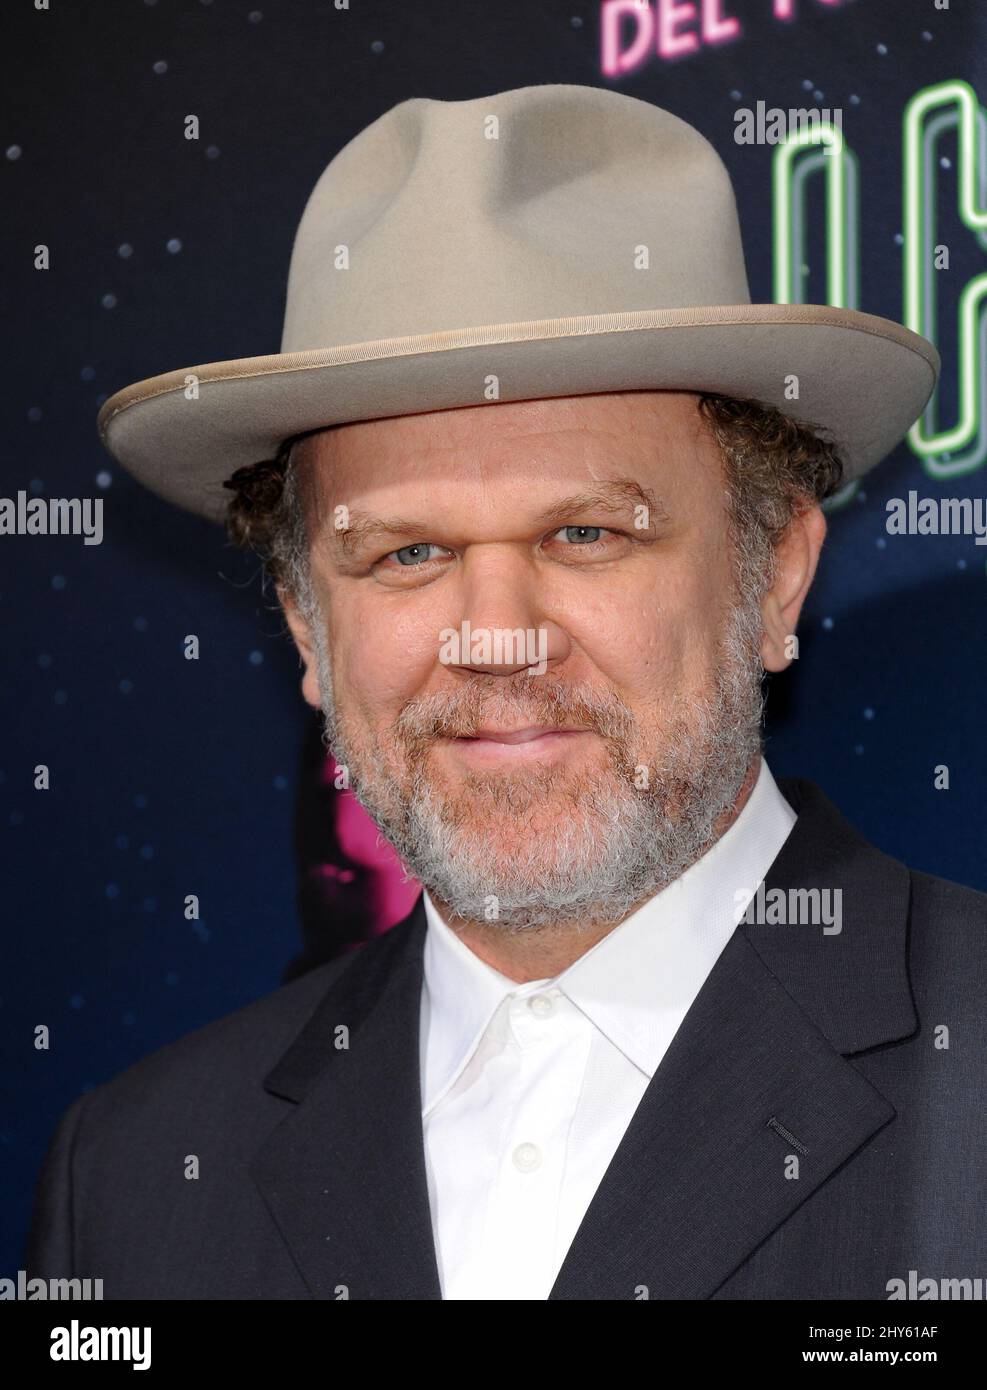 John C. Reilly attending the premiere of "Inherent Vice" in Los Angeles, California. Stock Photo